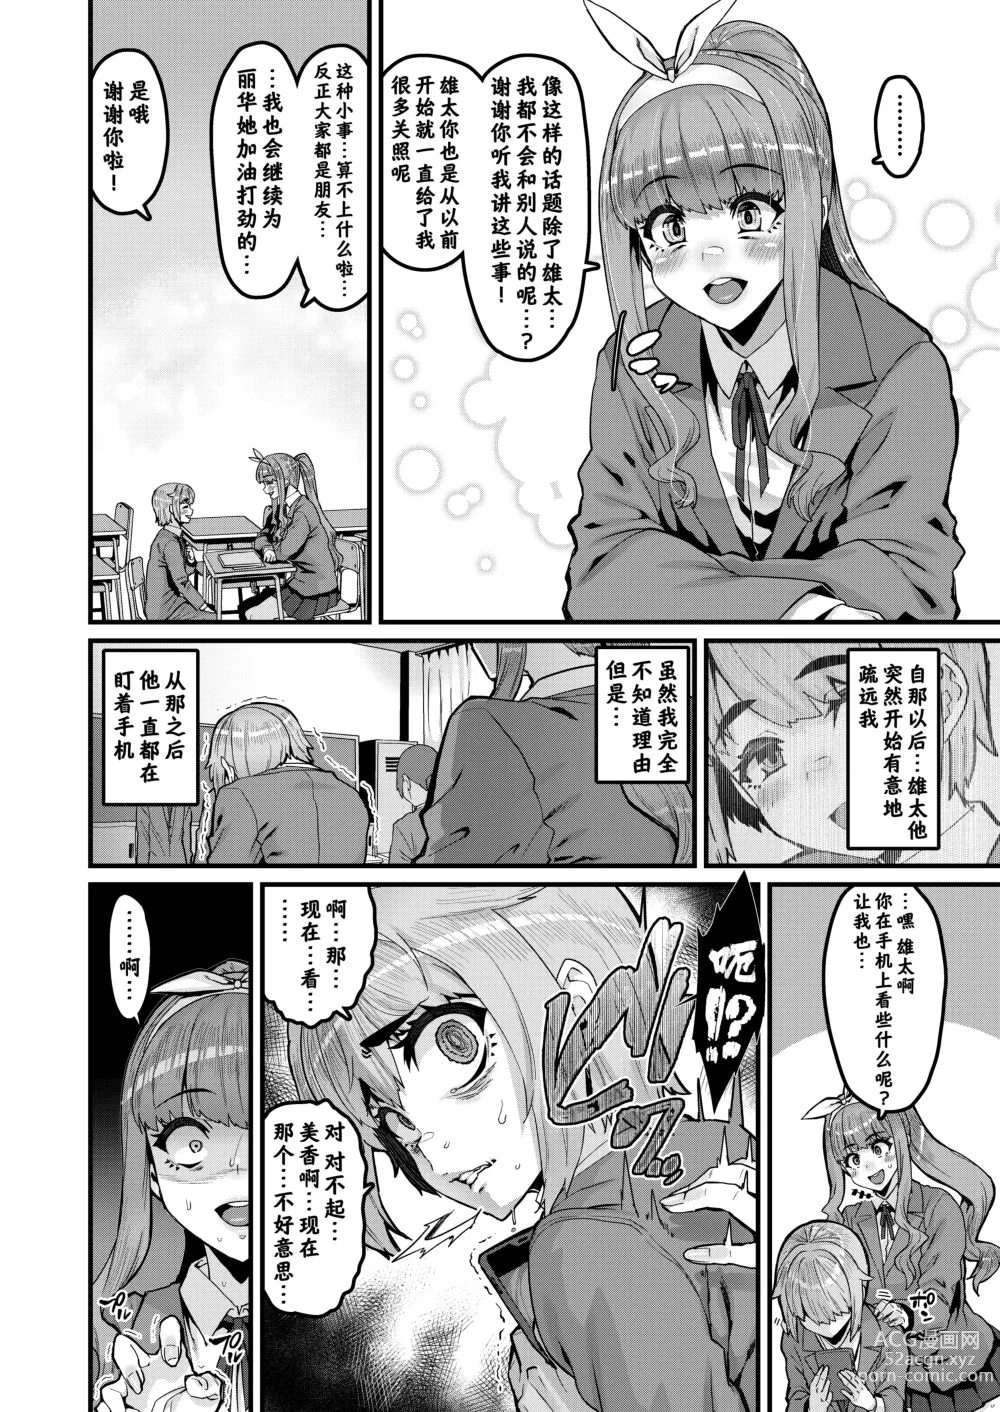 Page 5 of doujinshi 青梅竹马到此为止